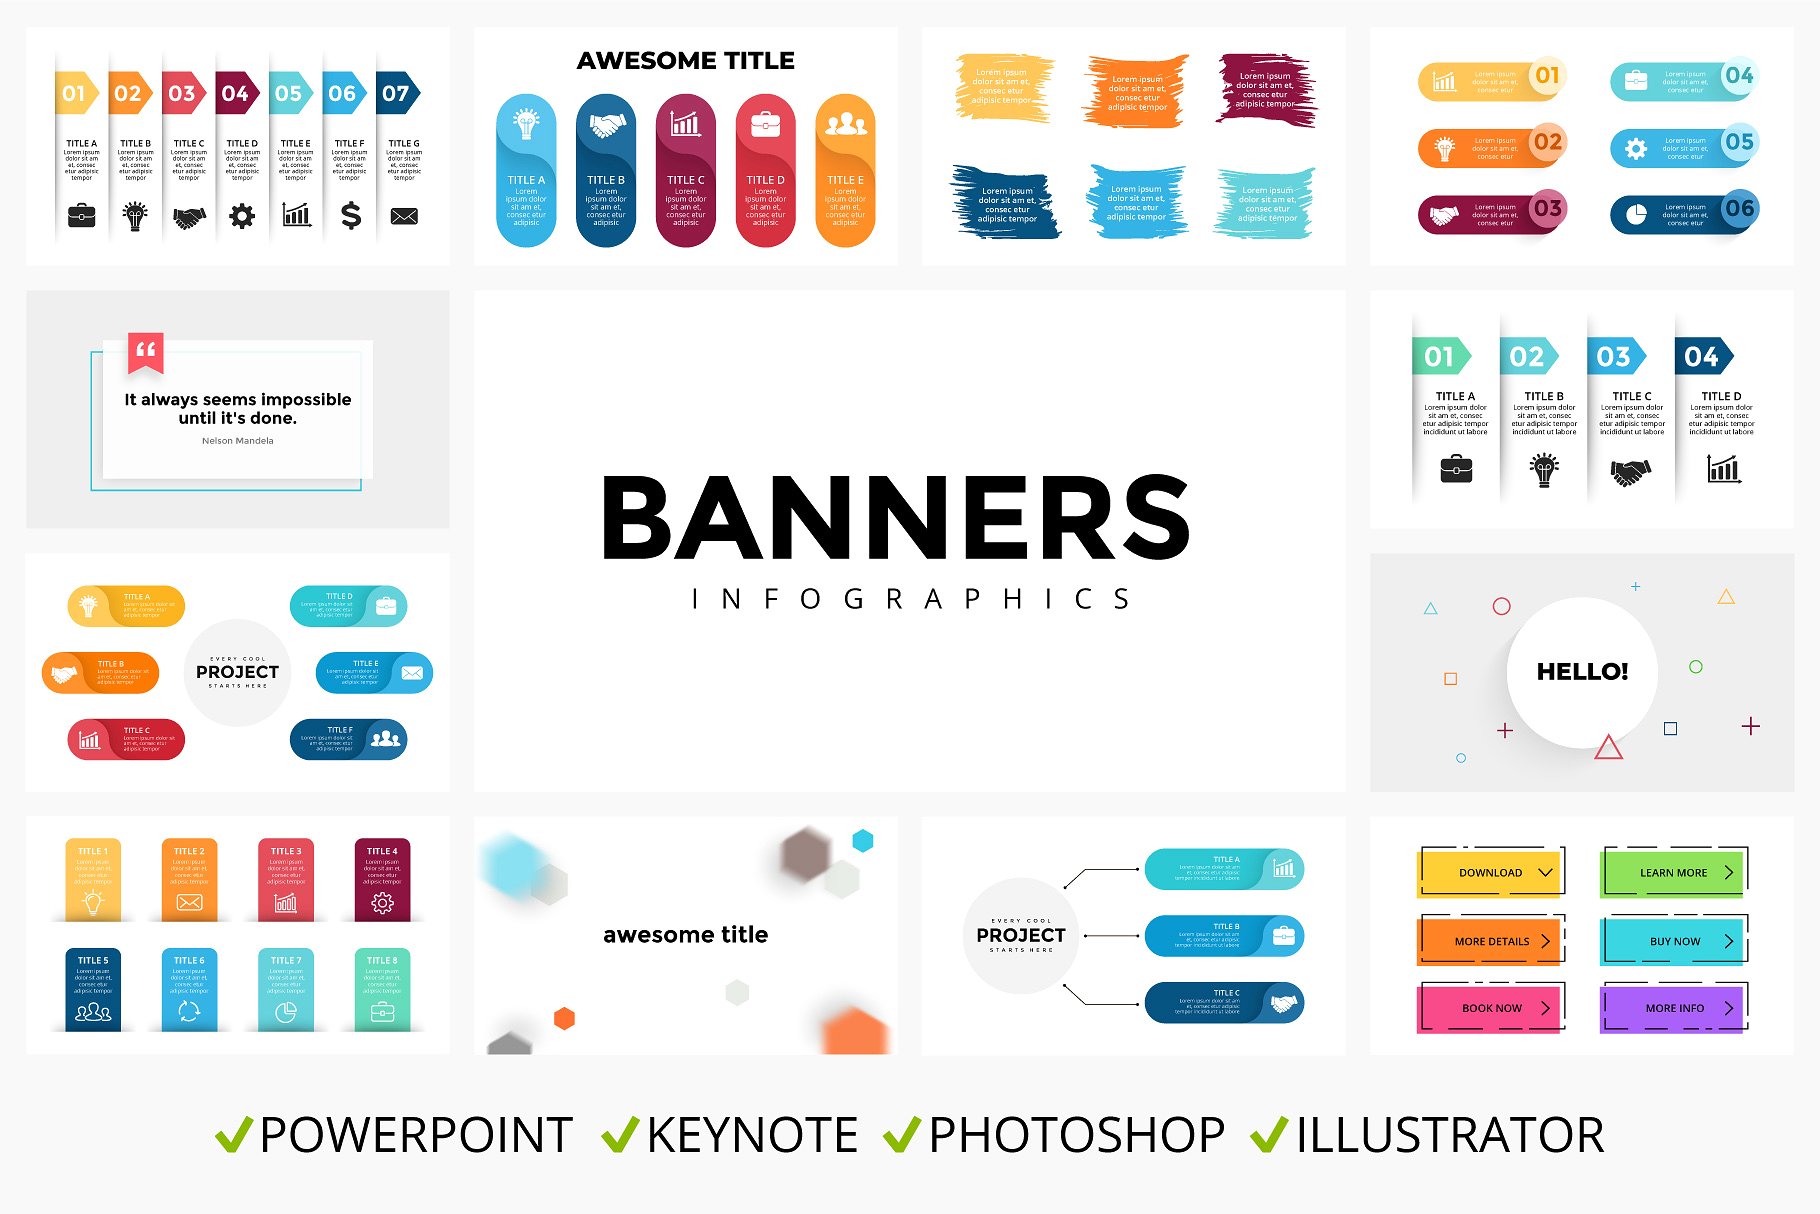 PPT信息图表 Banners. Infographic t